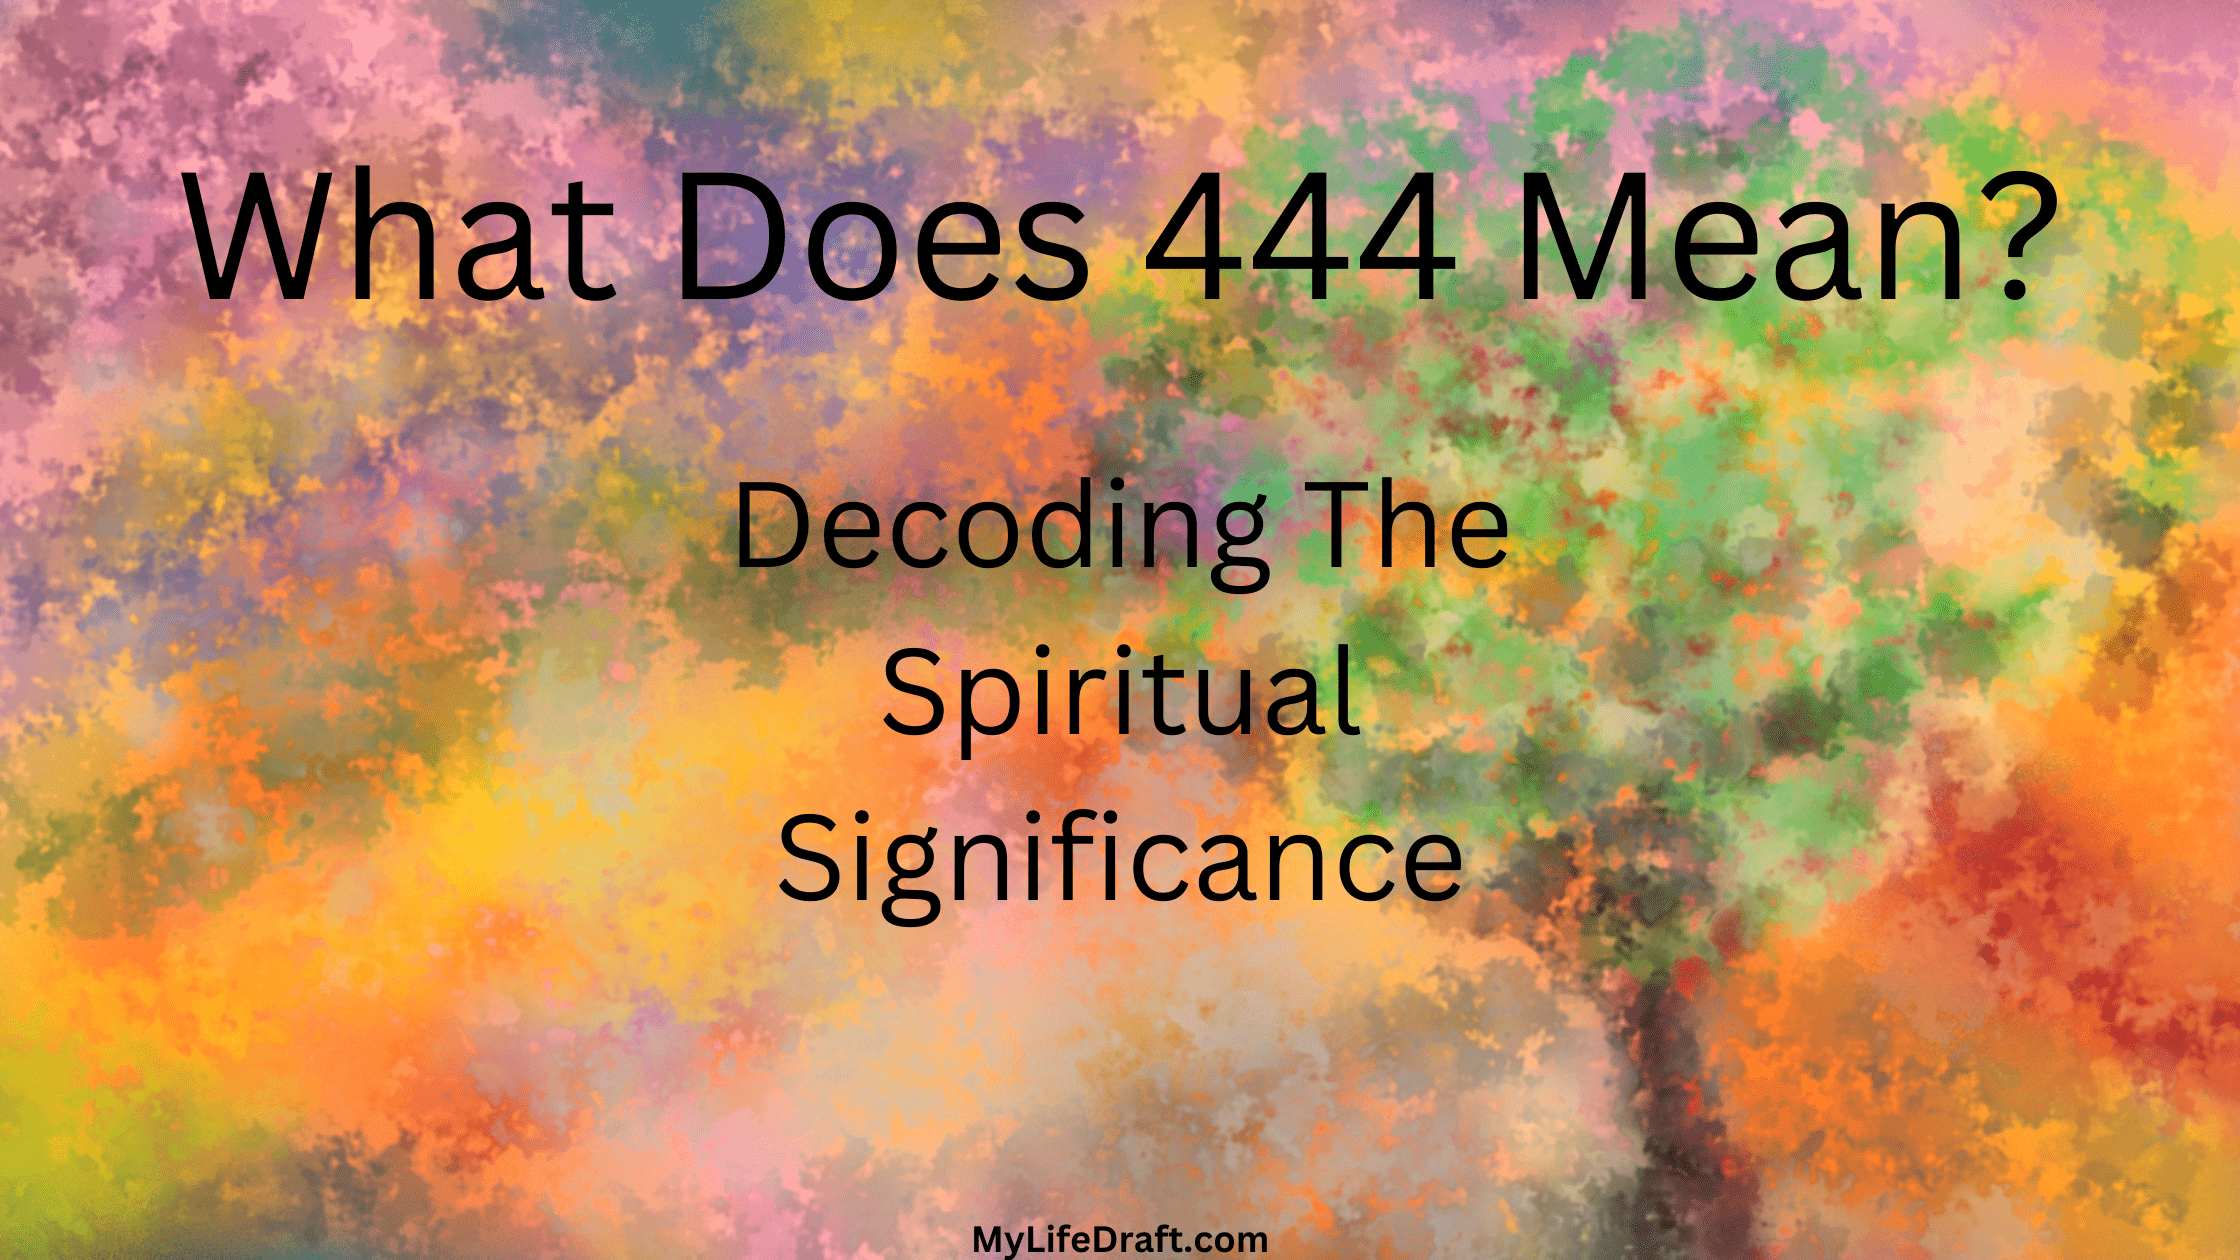 What Does 444 'Mean? Decoding the Spiritual Significance